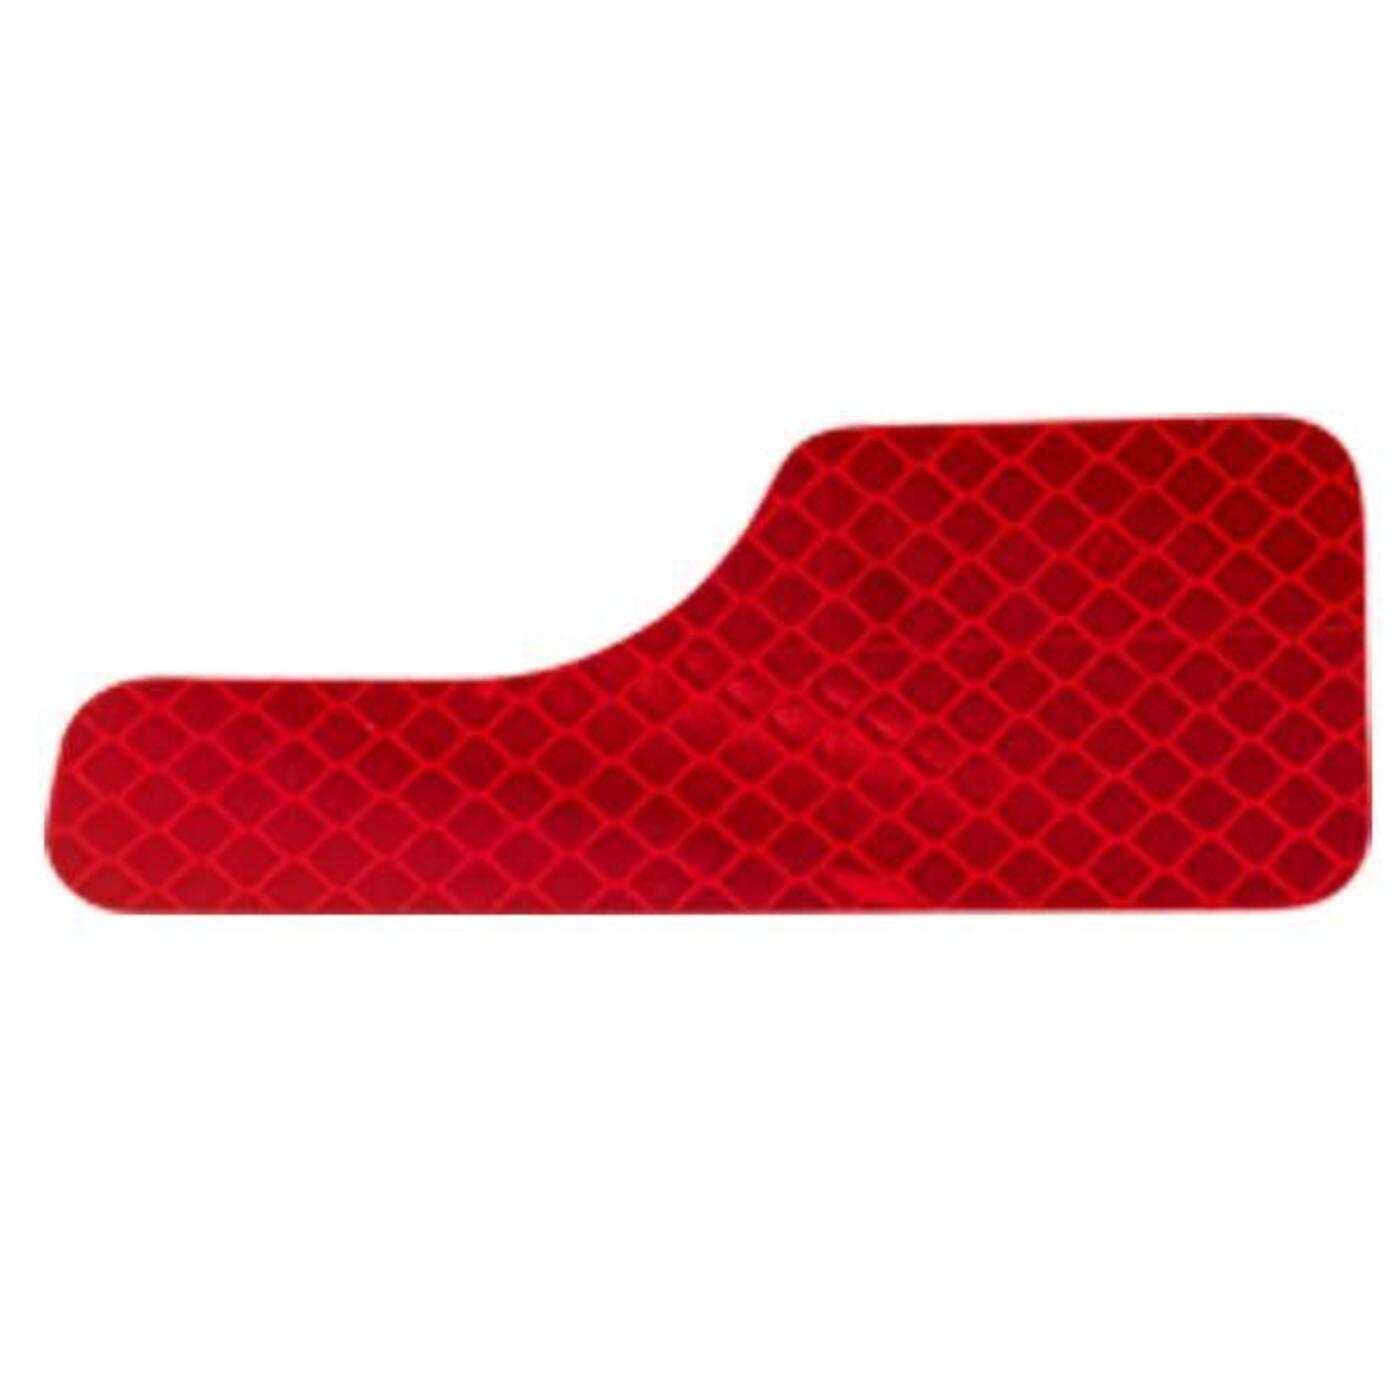 Passenger - E-Z-GO RXV Red Rear Reflector Years 2008-Up